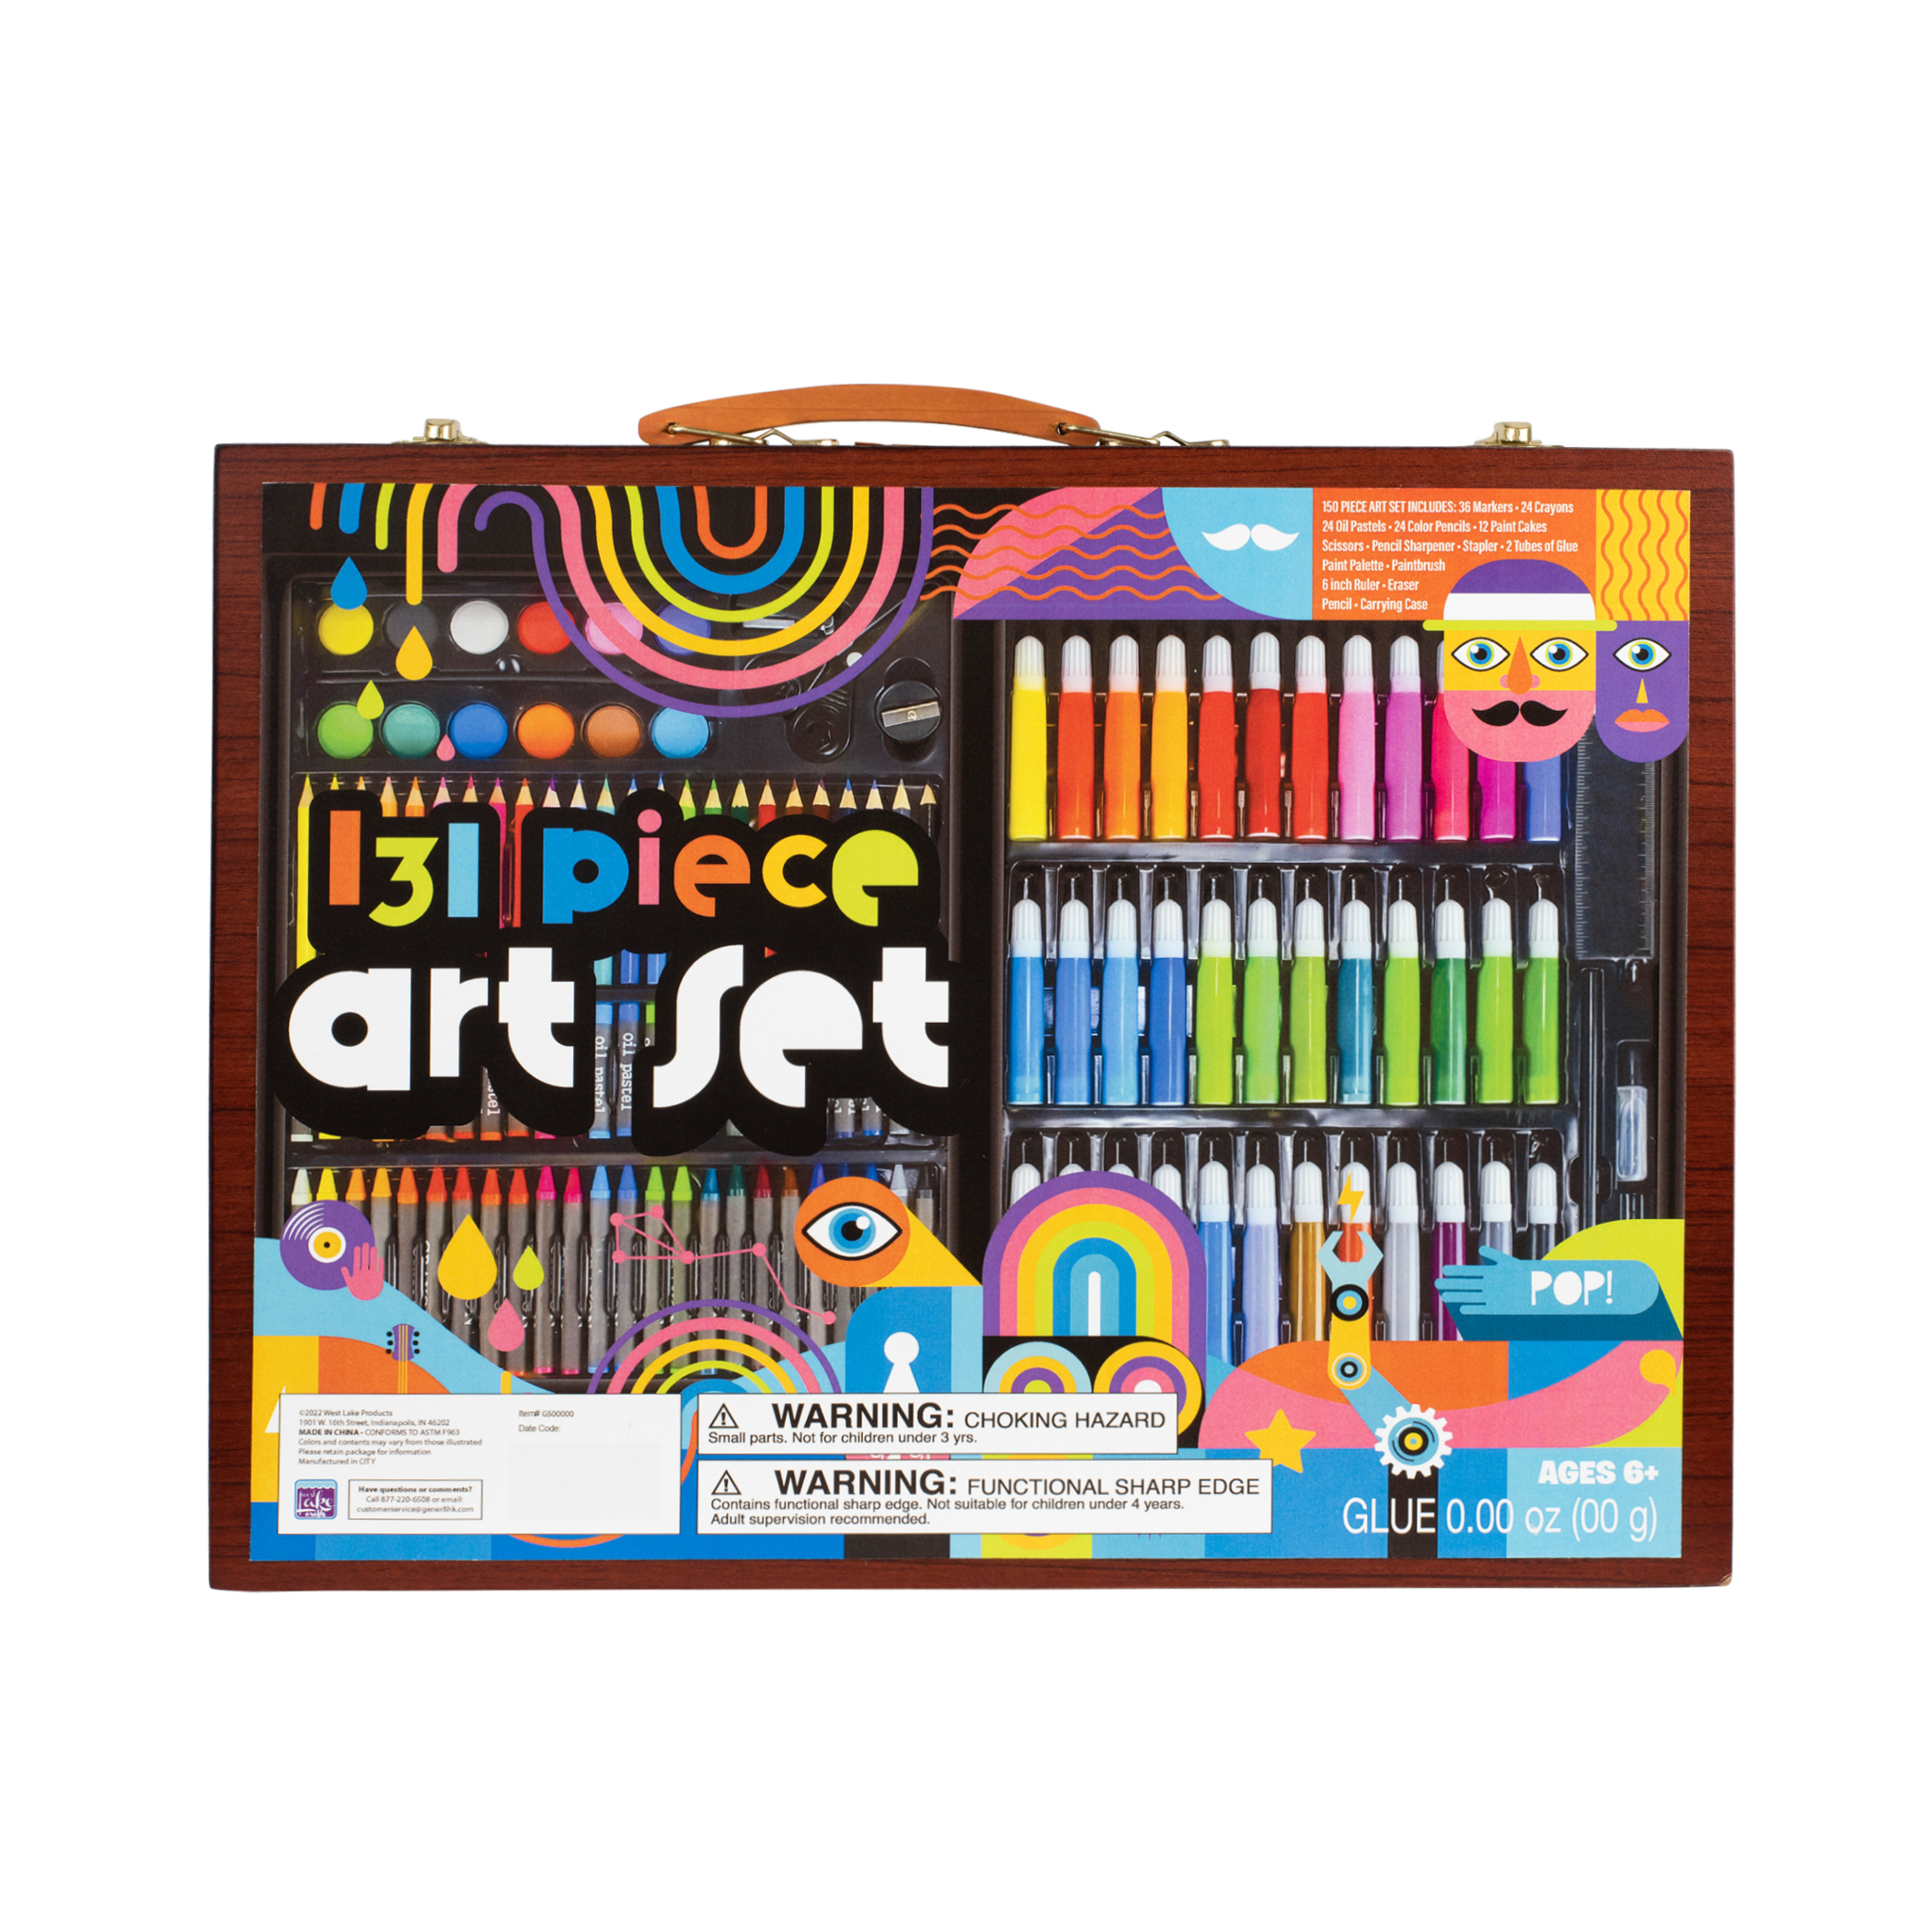 131 Pc. Deluxe Art Set - Toys for Tots Virtual Toy Box